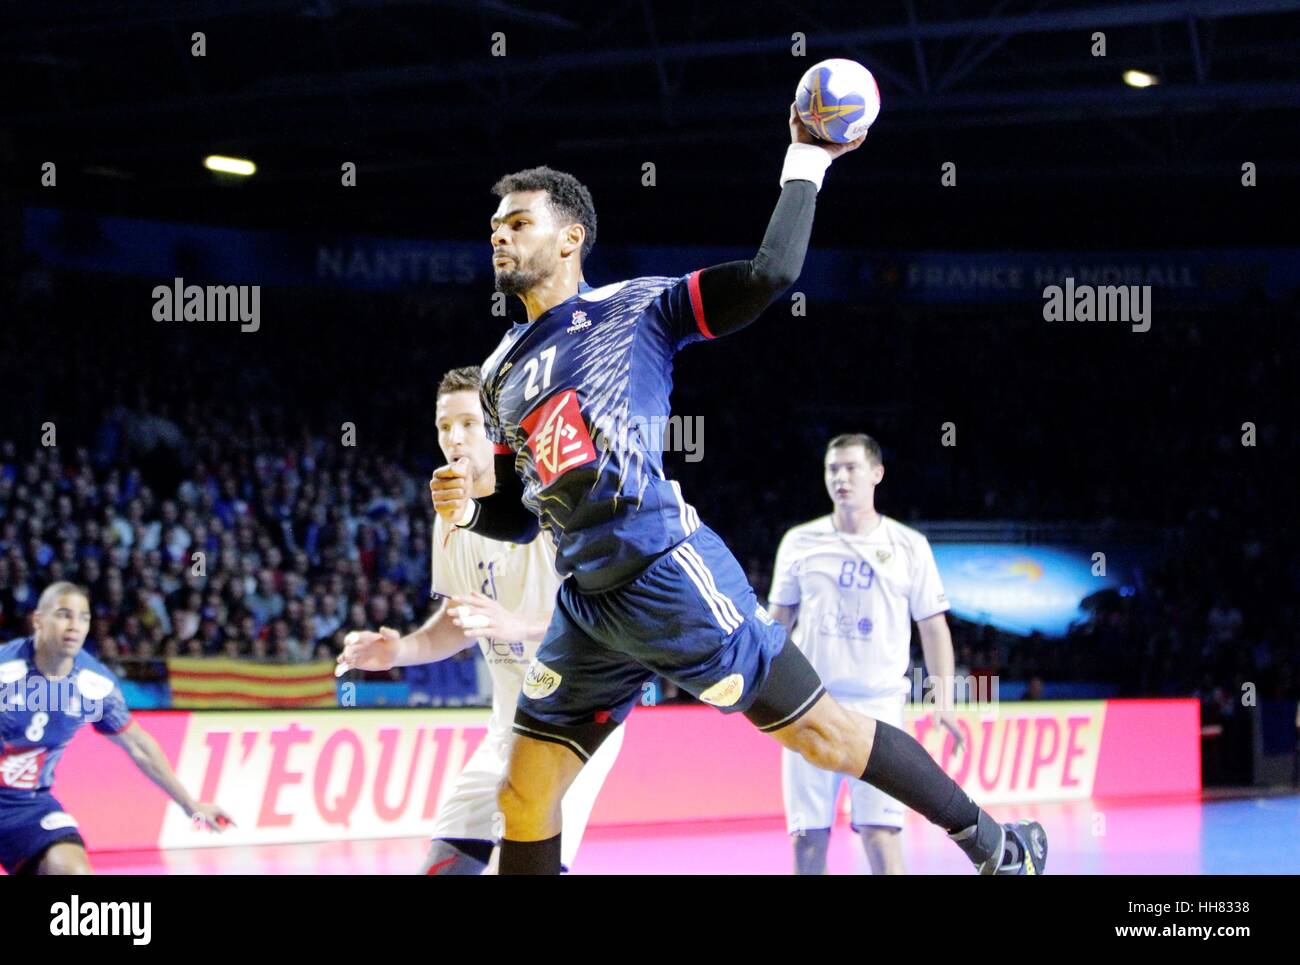 Nantes, France. 17th January, 2017. Adrien Dipanda of France seen during the France vs Russia game for the Men's Handball Championship in Nantes. Credit: Laurent Lairys/Agence Locevaphotos/Alamy Live News Stock Photo